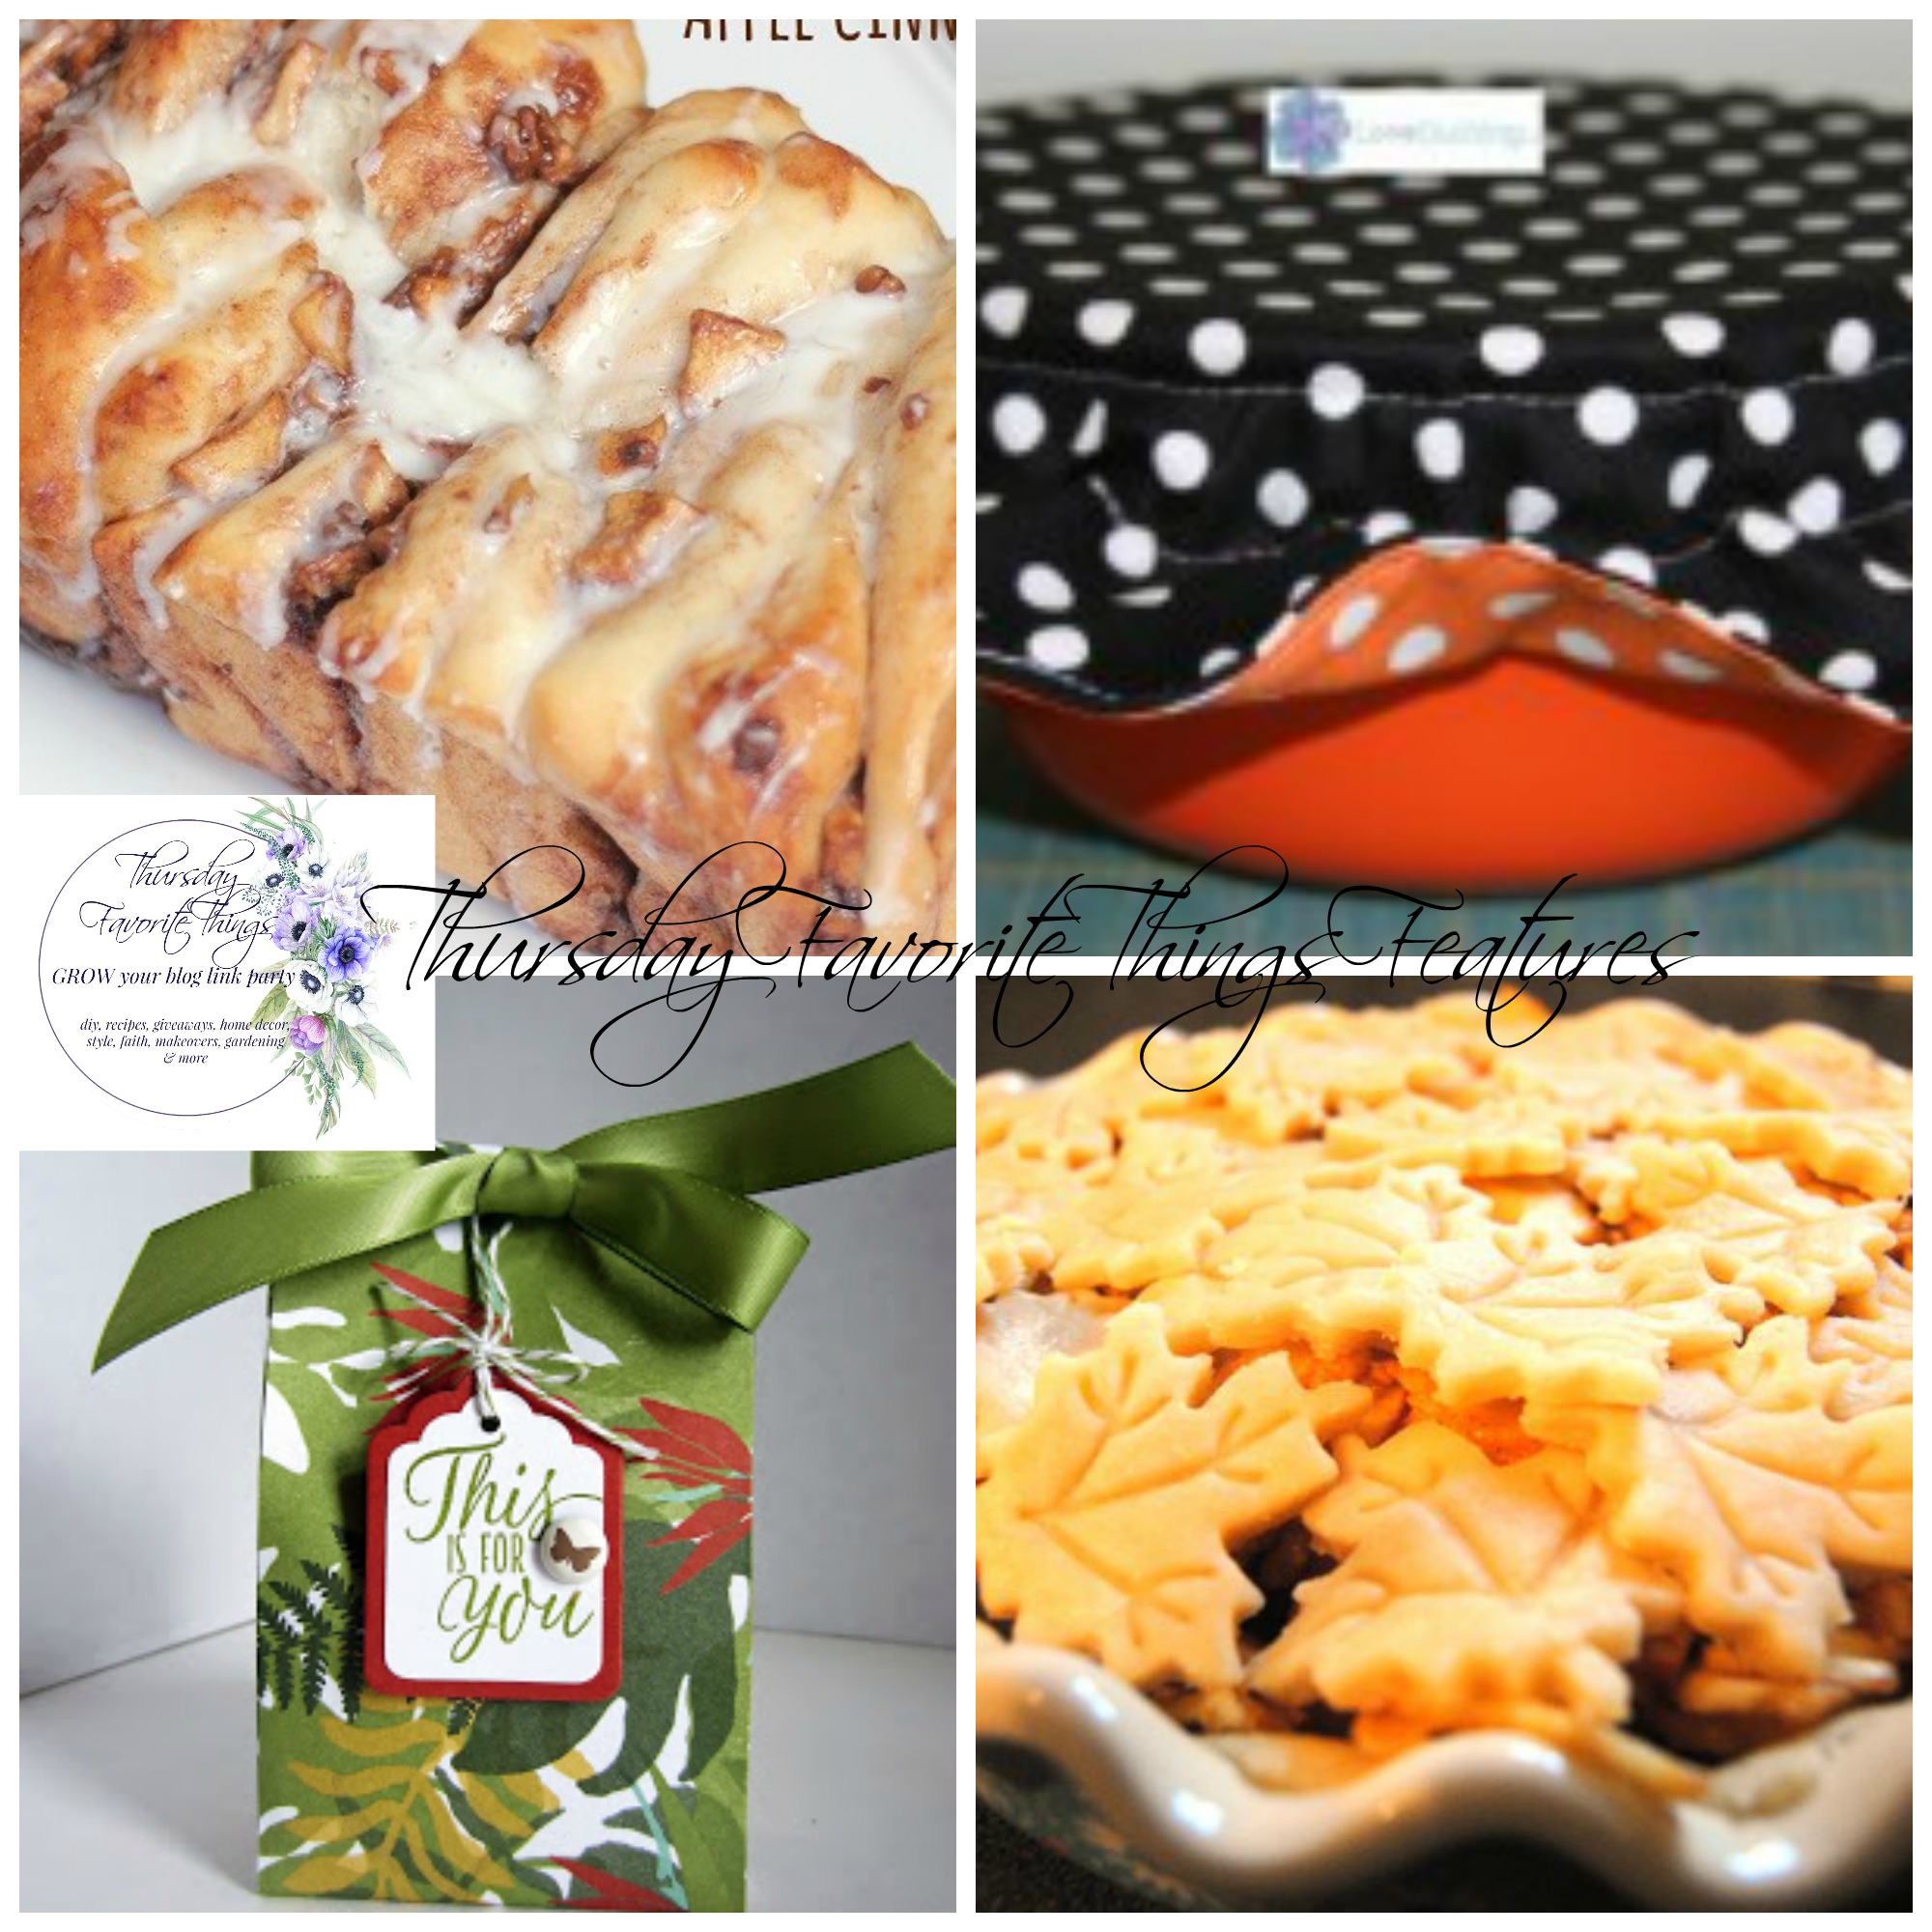 Oh Nuts and Thursday Favorite Things Link Party